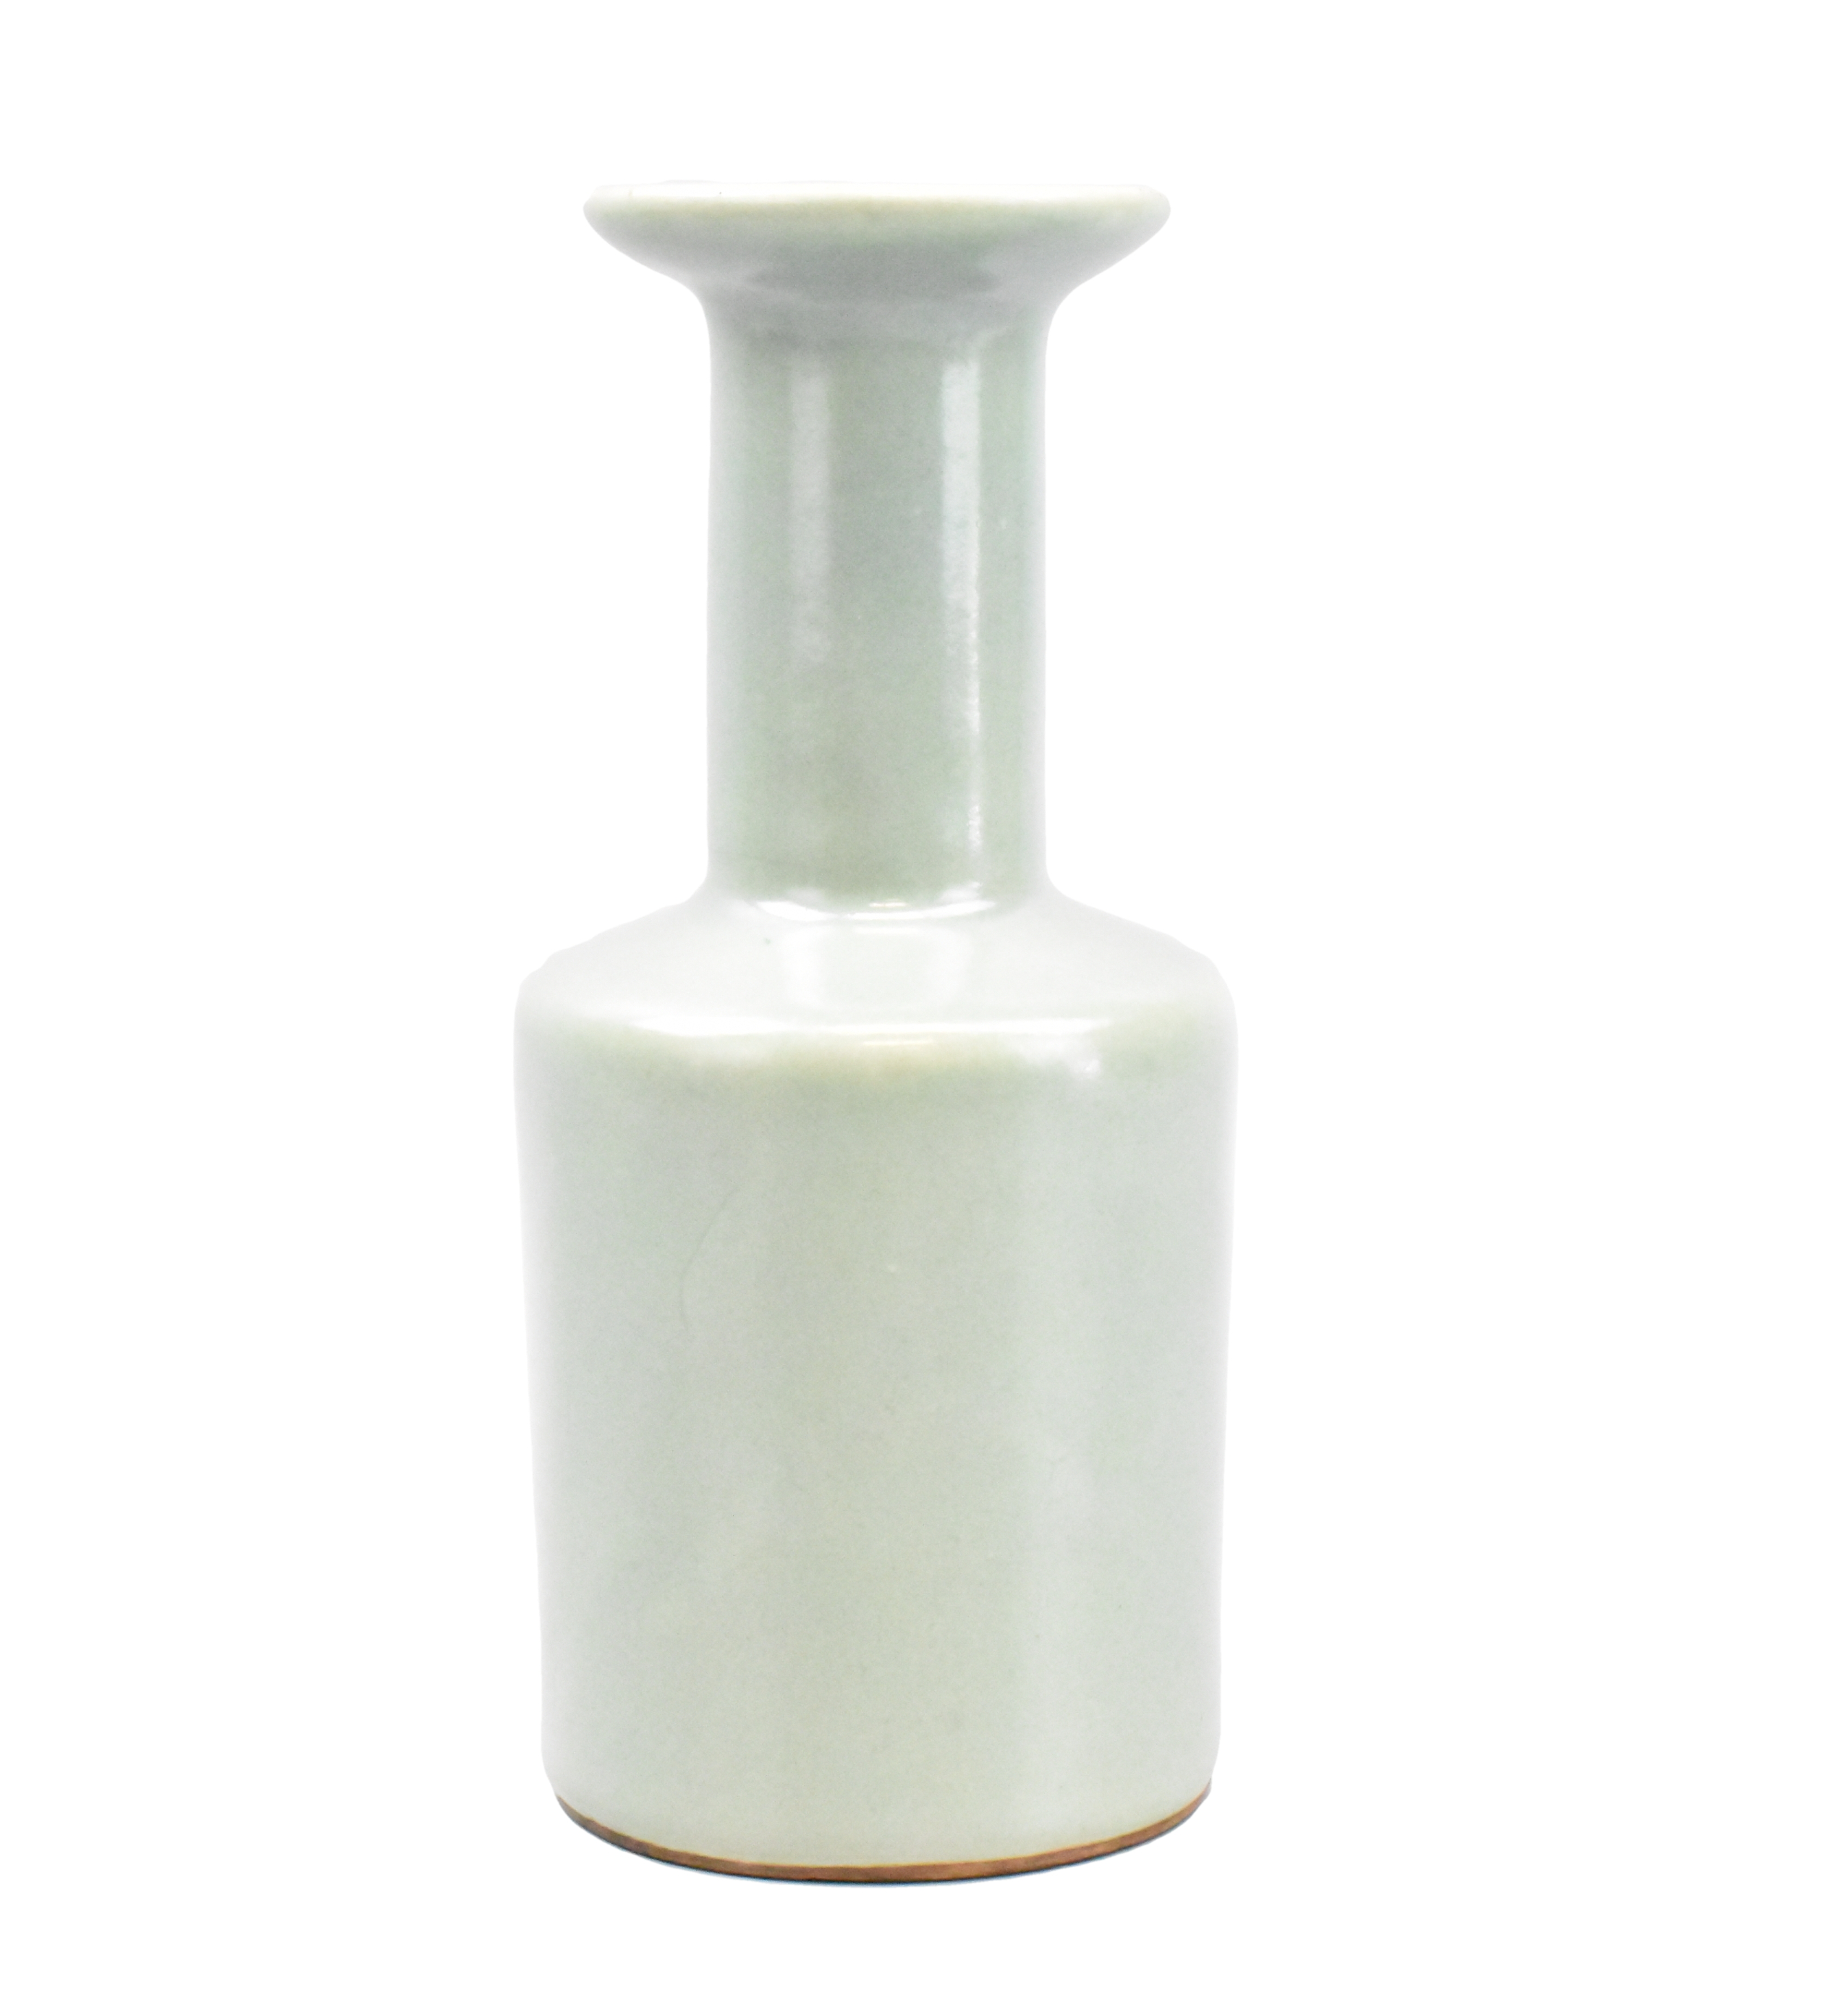 CHINESE LONGQUAN WARE CELADON MALLET 33a6df